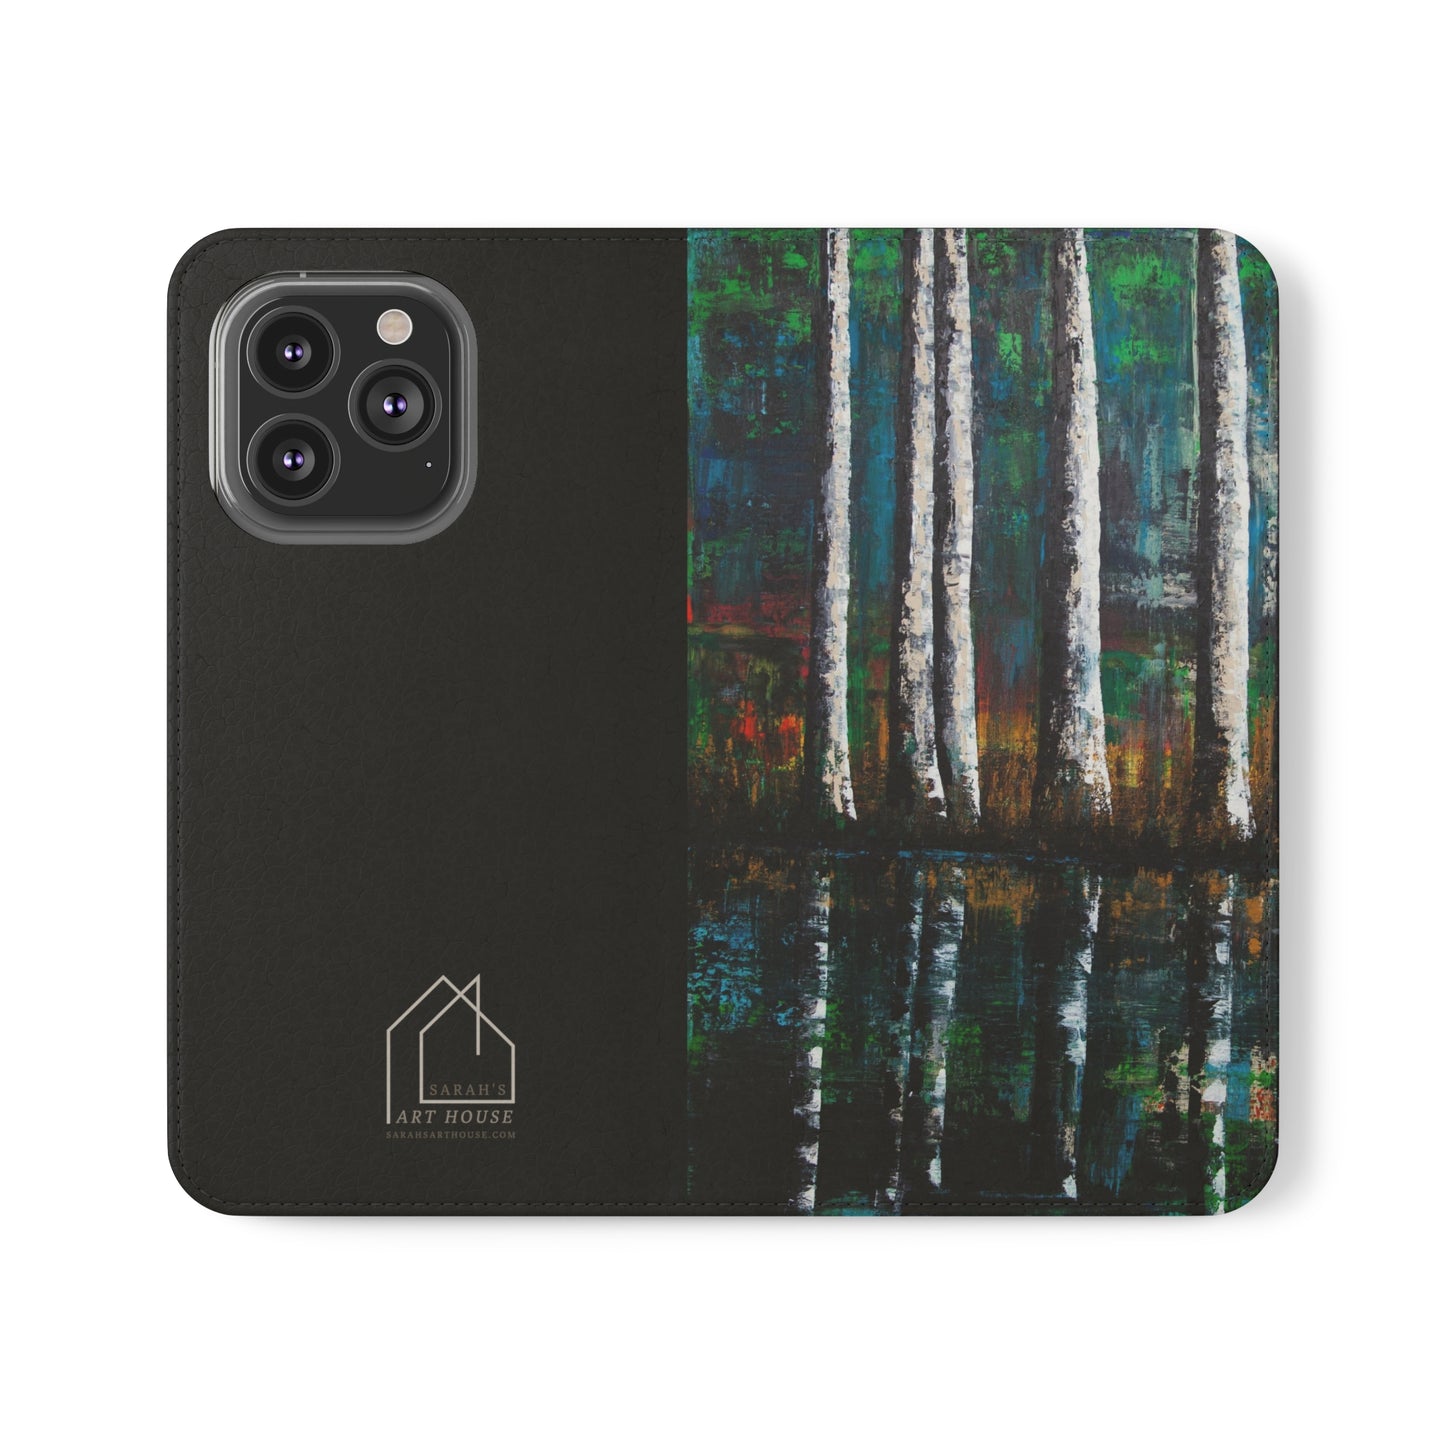 Phone Flip Cases - Reflections